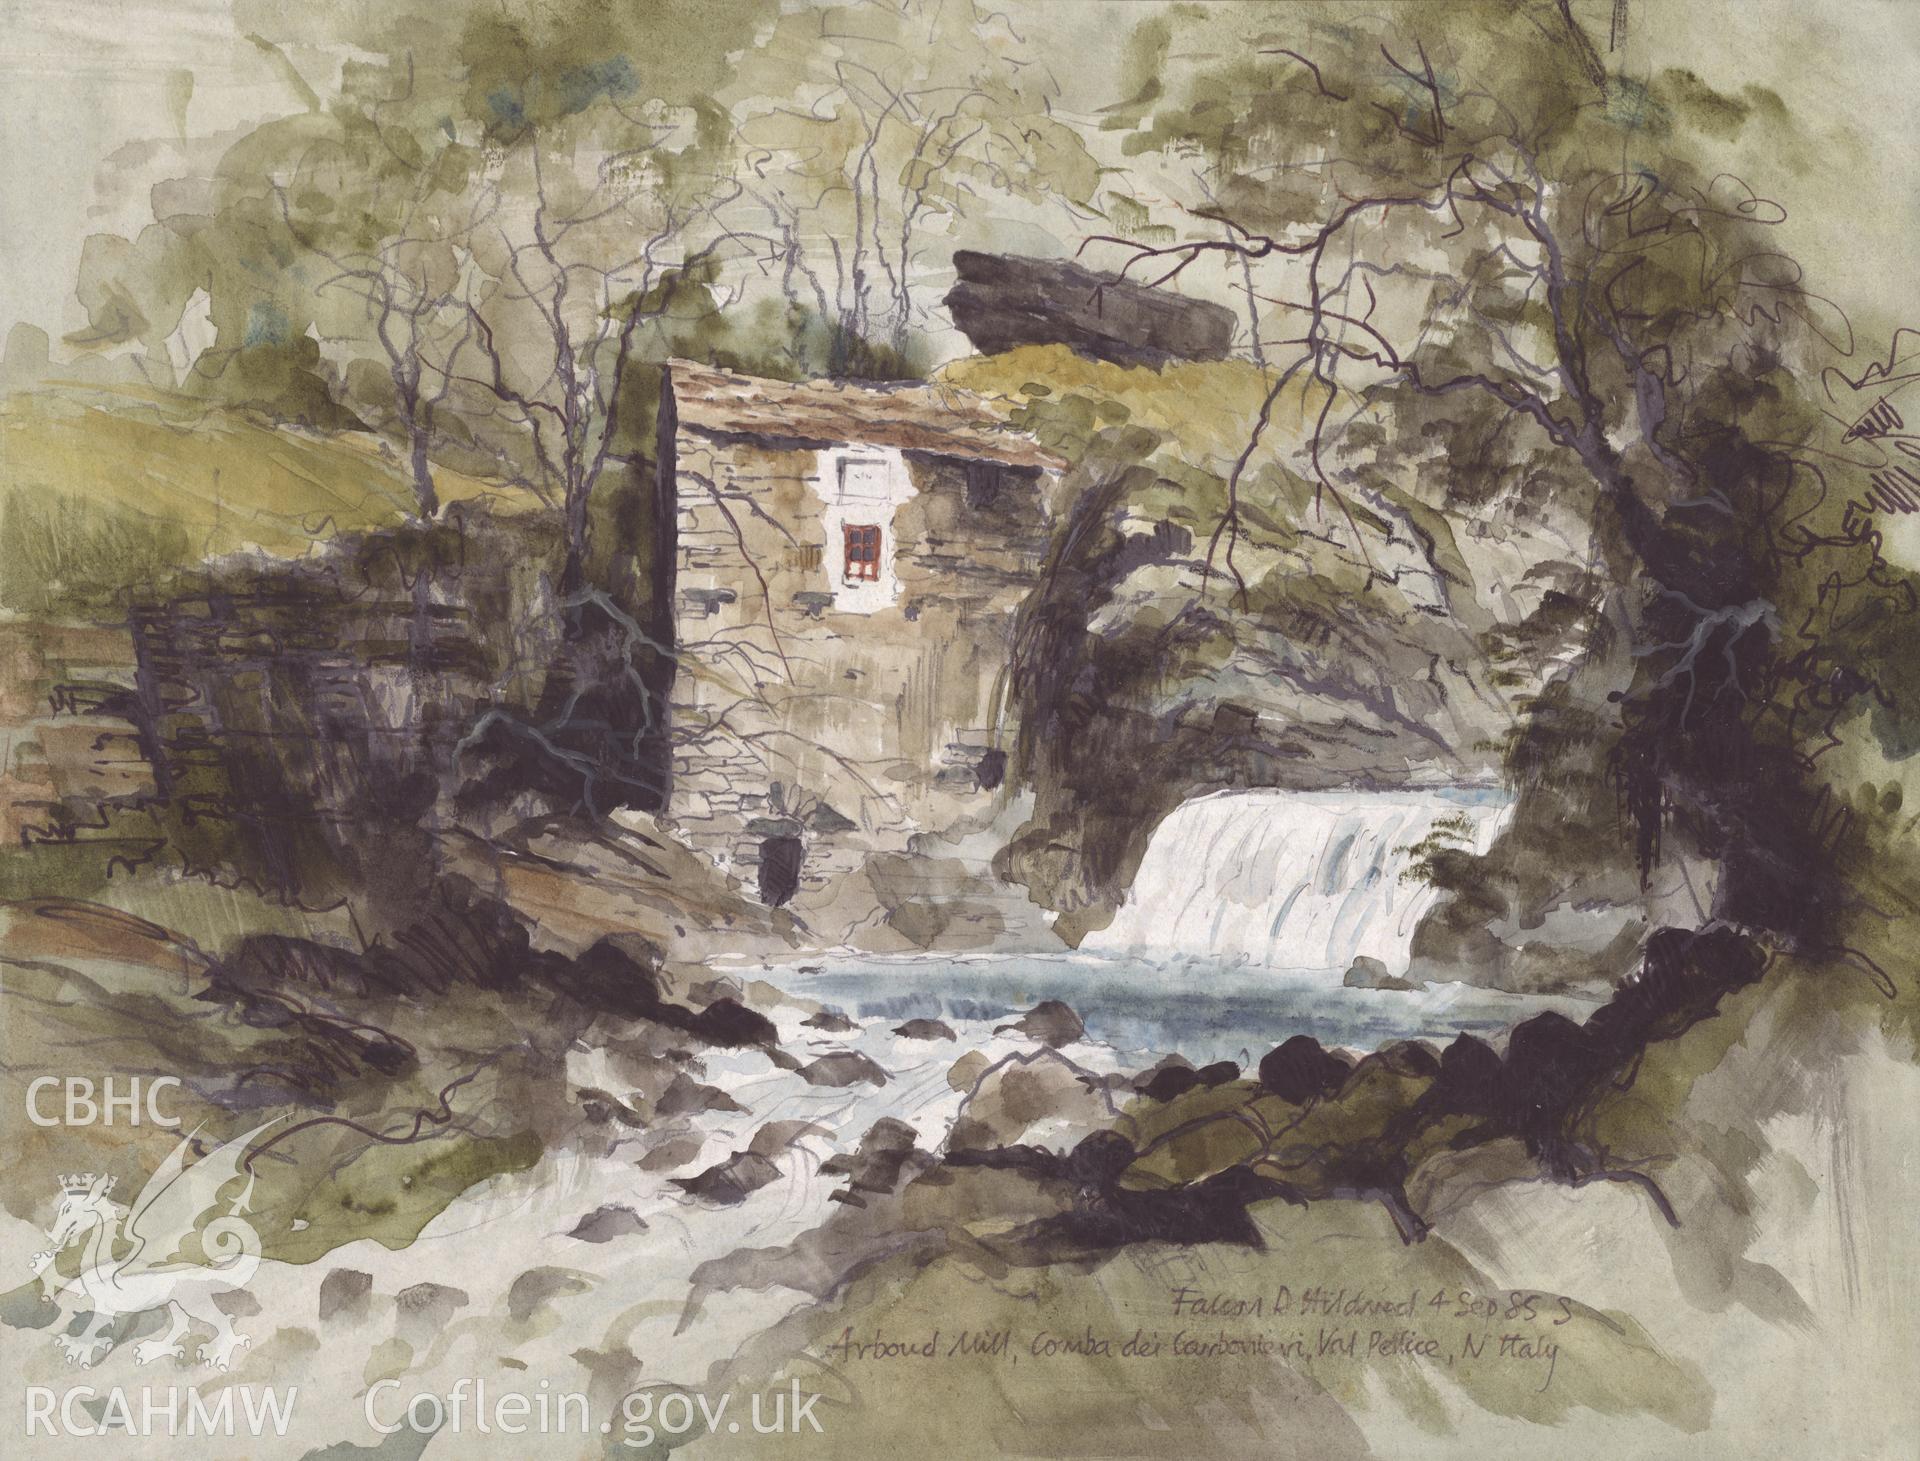 Mill at Lambia dei Carbonieri, Italy: (pencil and watercolour) drawing.